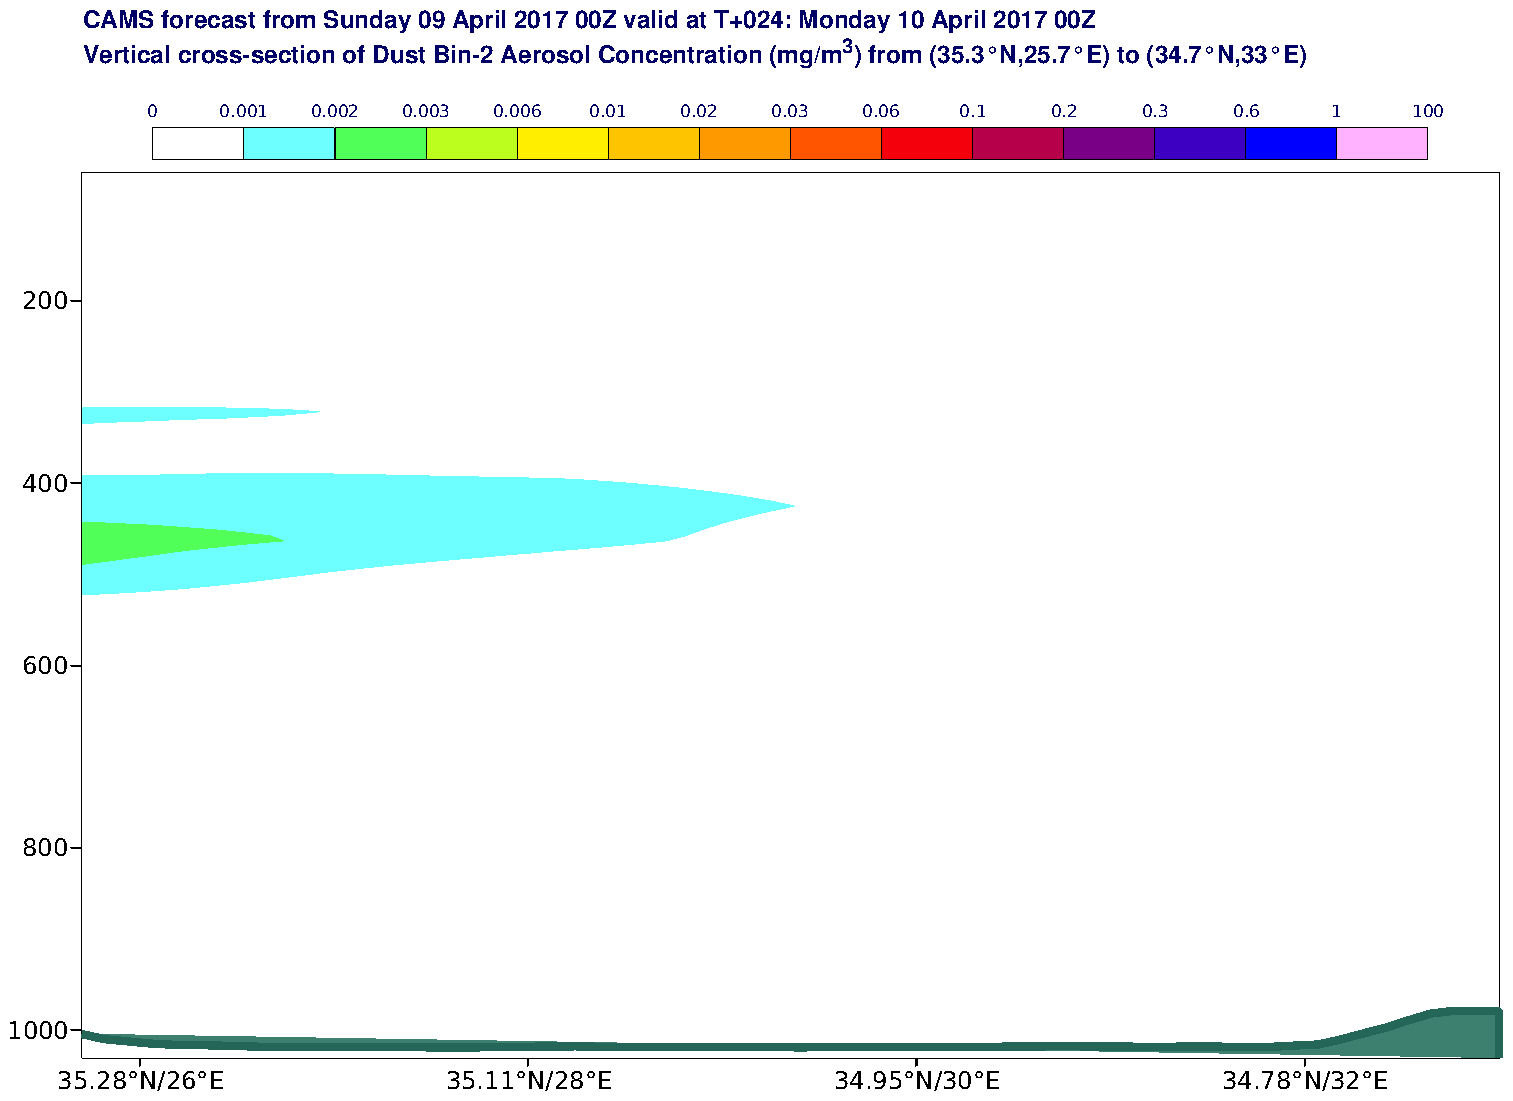 Vertical cross-section of Dust Bin-2 Aerosol Concentration (mg/m3) valid at T24 - 2017-04-10 00:00